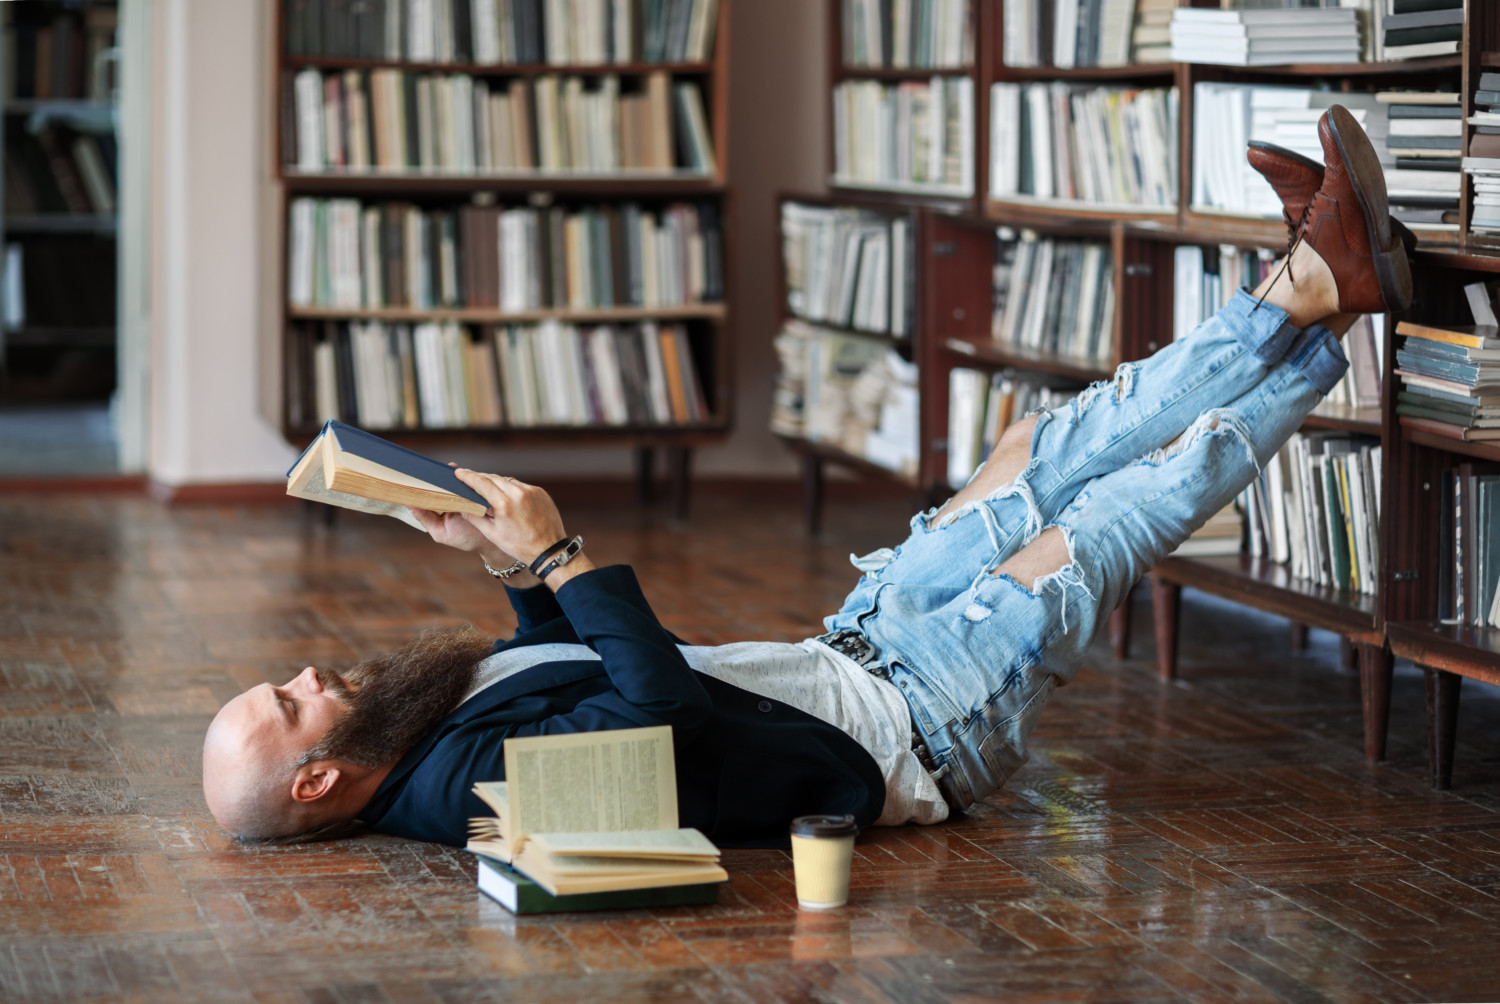 Man reads book on floor in library